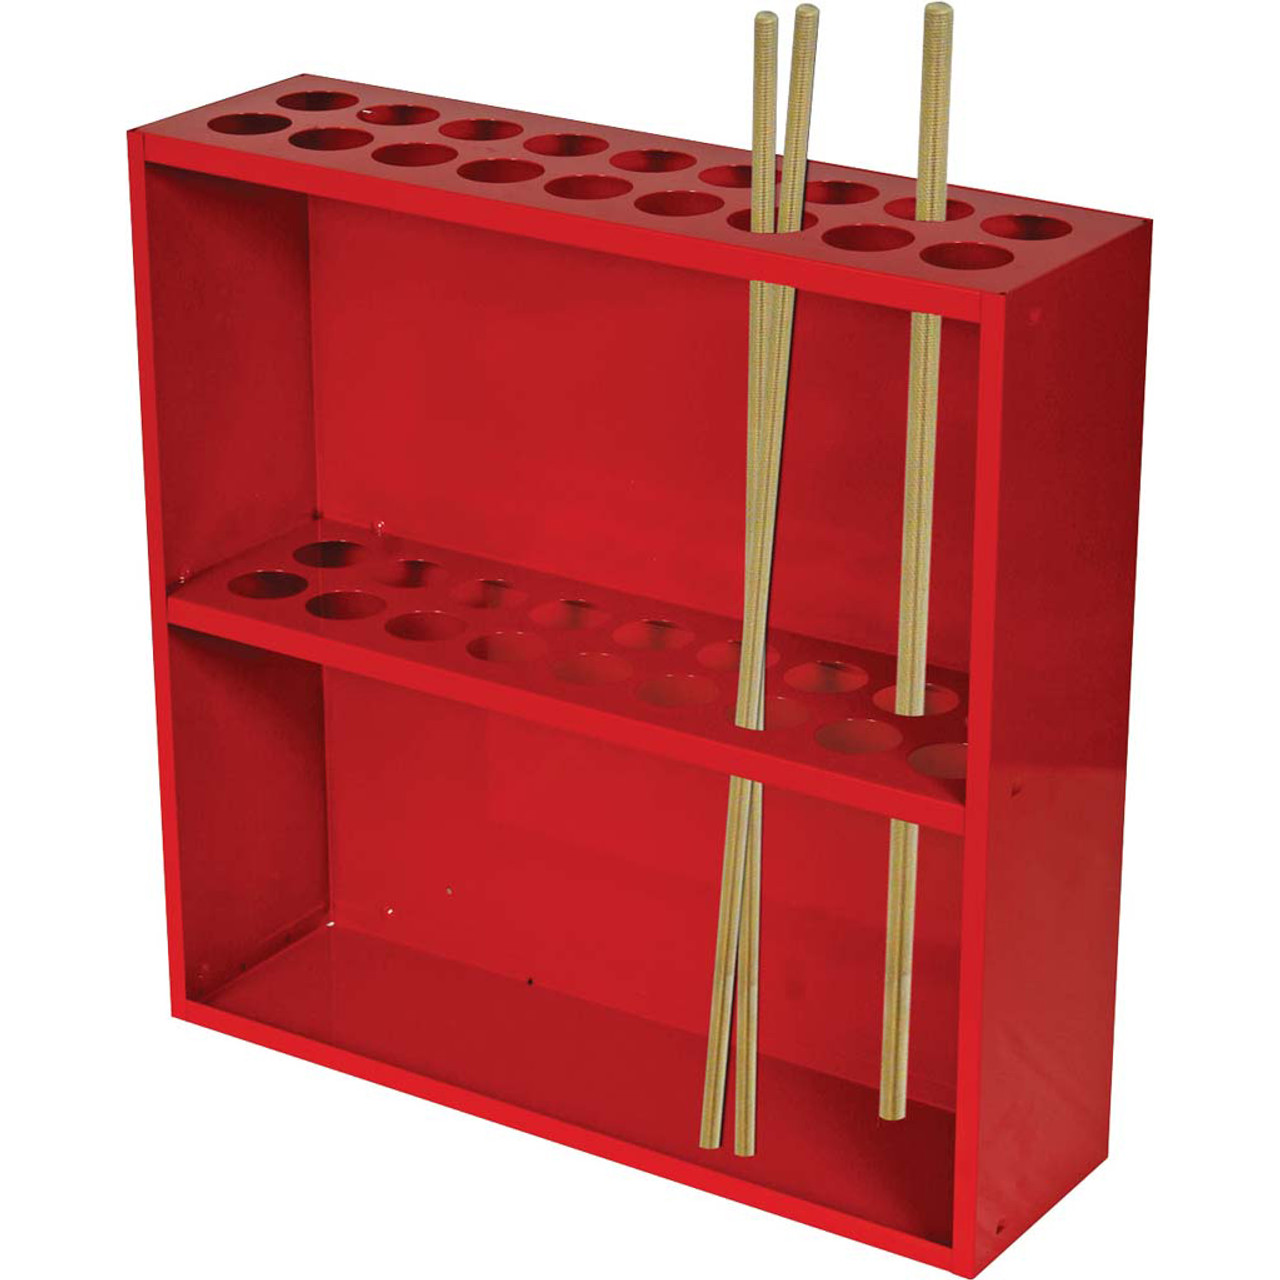 rod rack, rod rack Suppliers and Manufacturers at